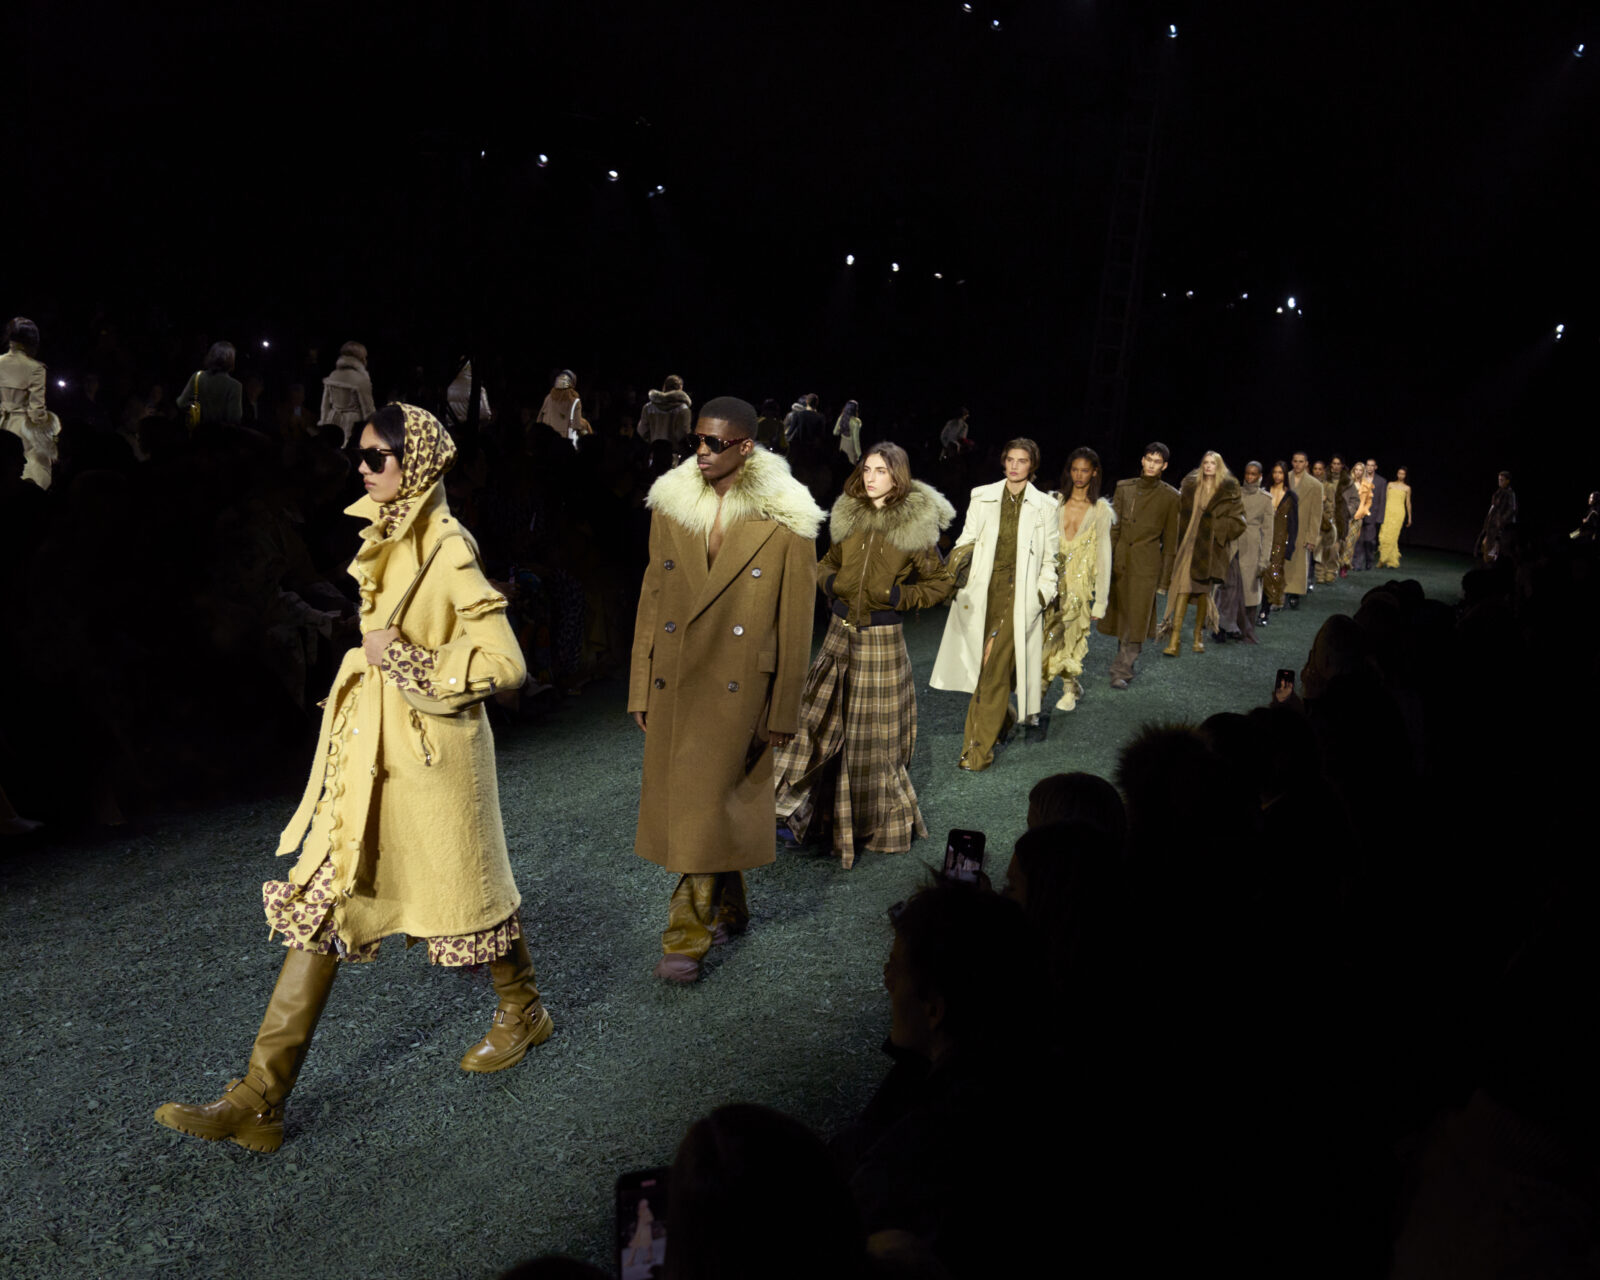 Models walk the runway in a variety of layered winter ensembles from Burberry's Winter 2024 collection, with an emphasis on oversized coats and rich textures, against a backdrop of a dimly lit, green-floored runway surrounded by an audience.